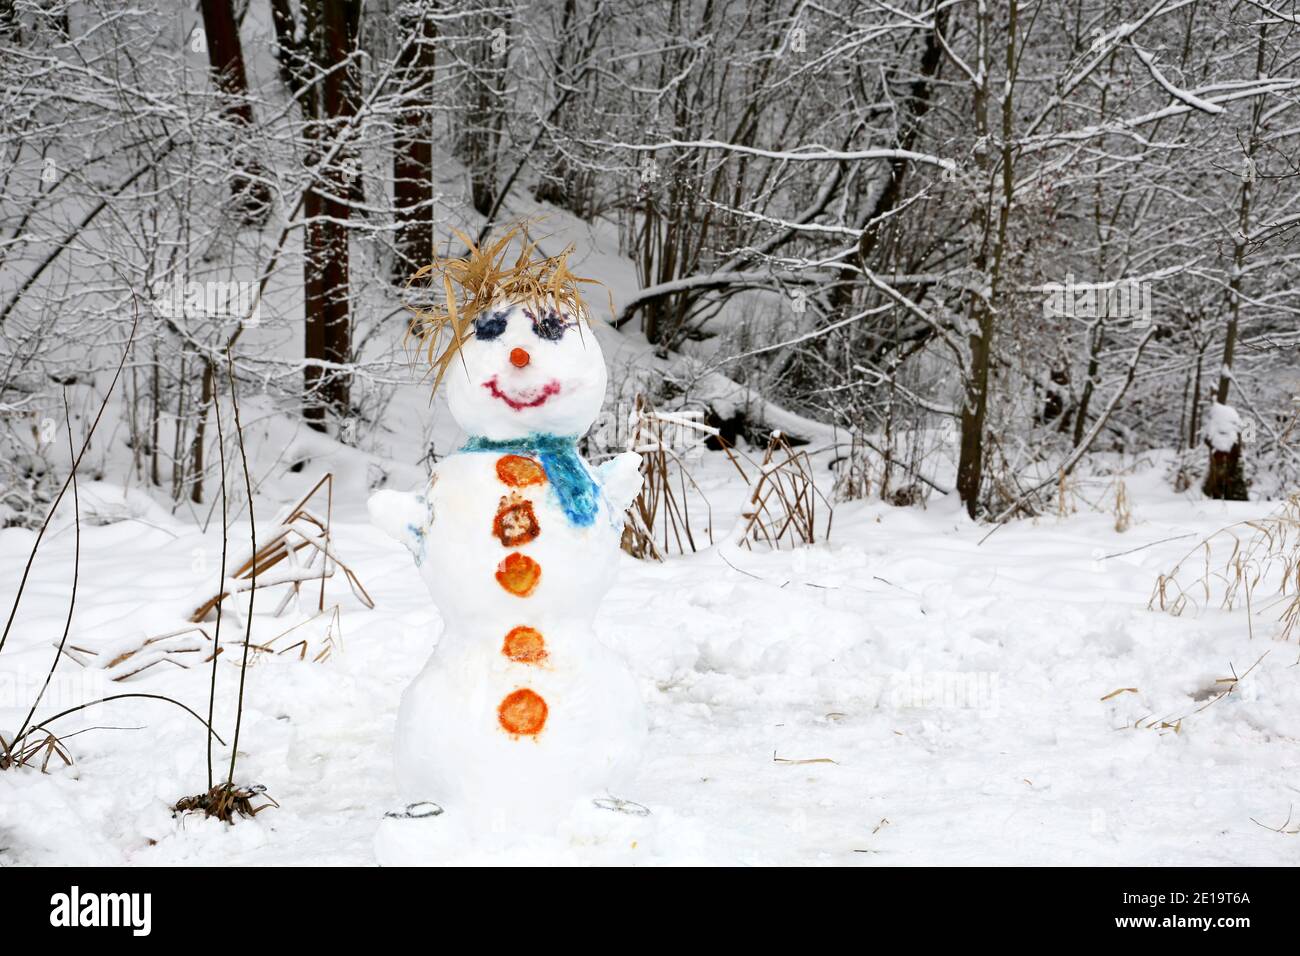 Funny snowman in a winter park. Children's creativity, leisure at cold weather Stock Photo